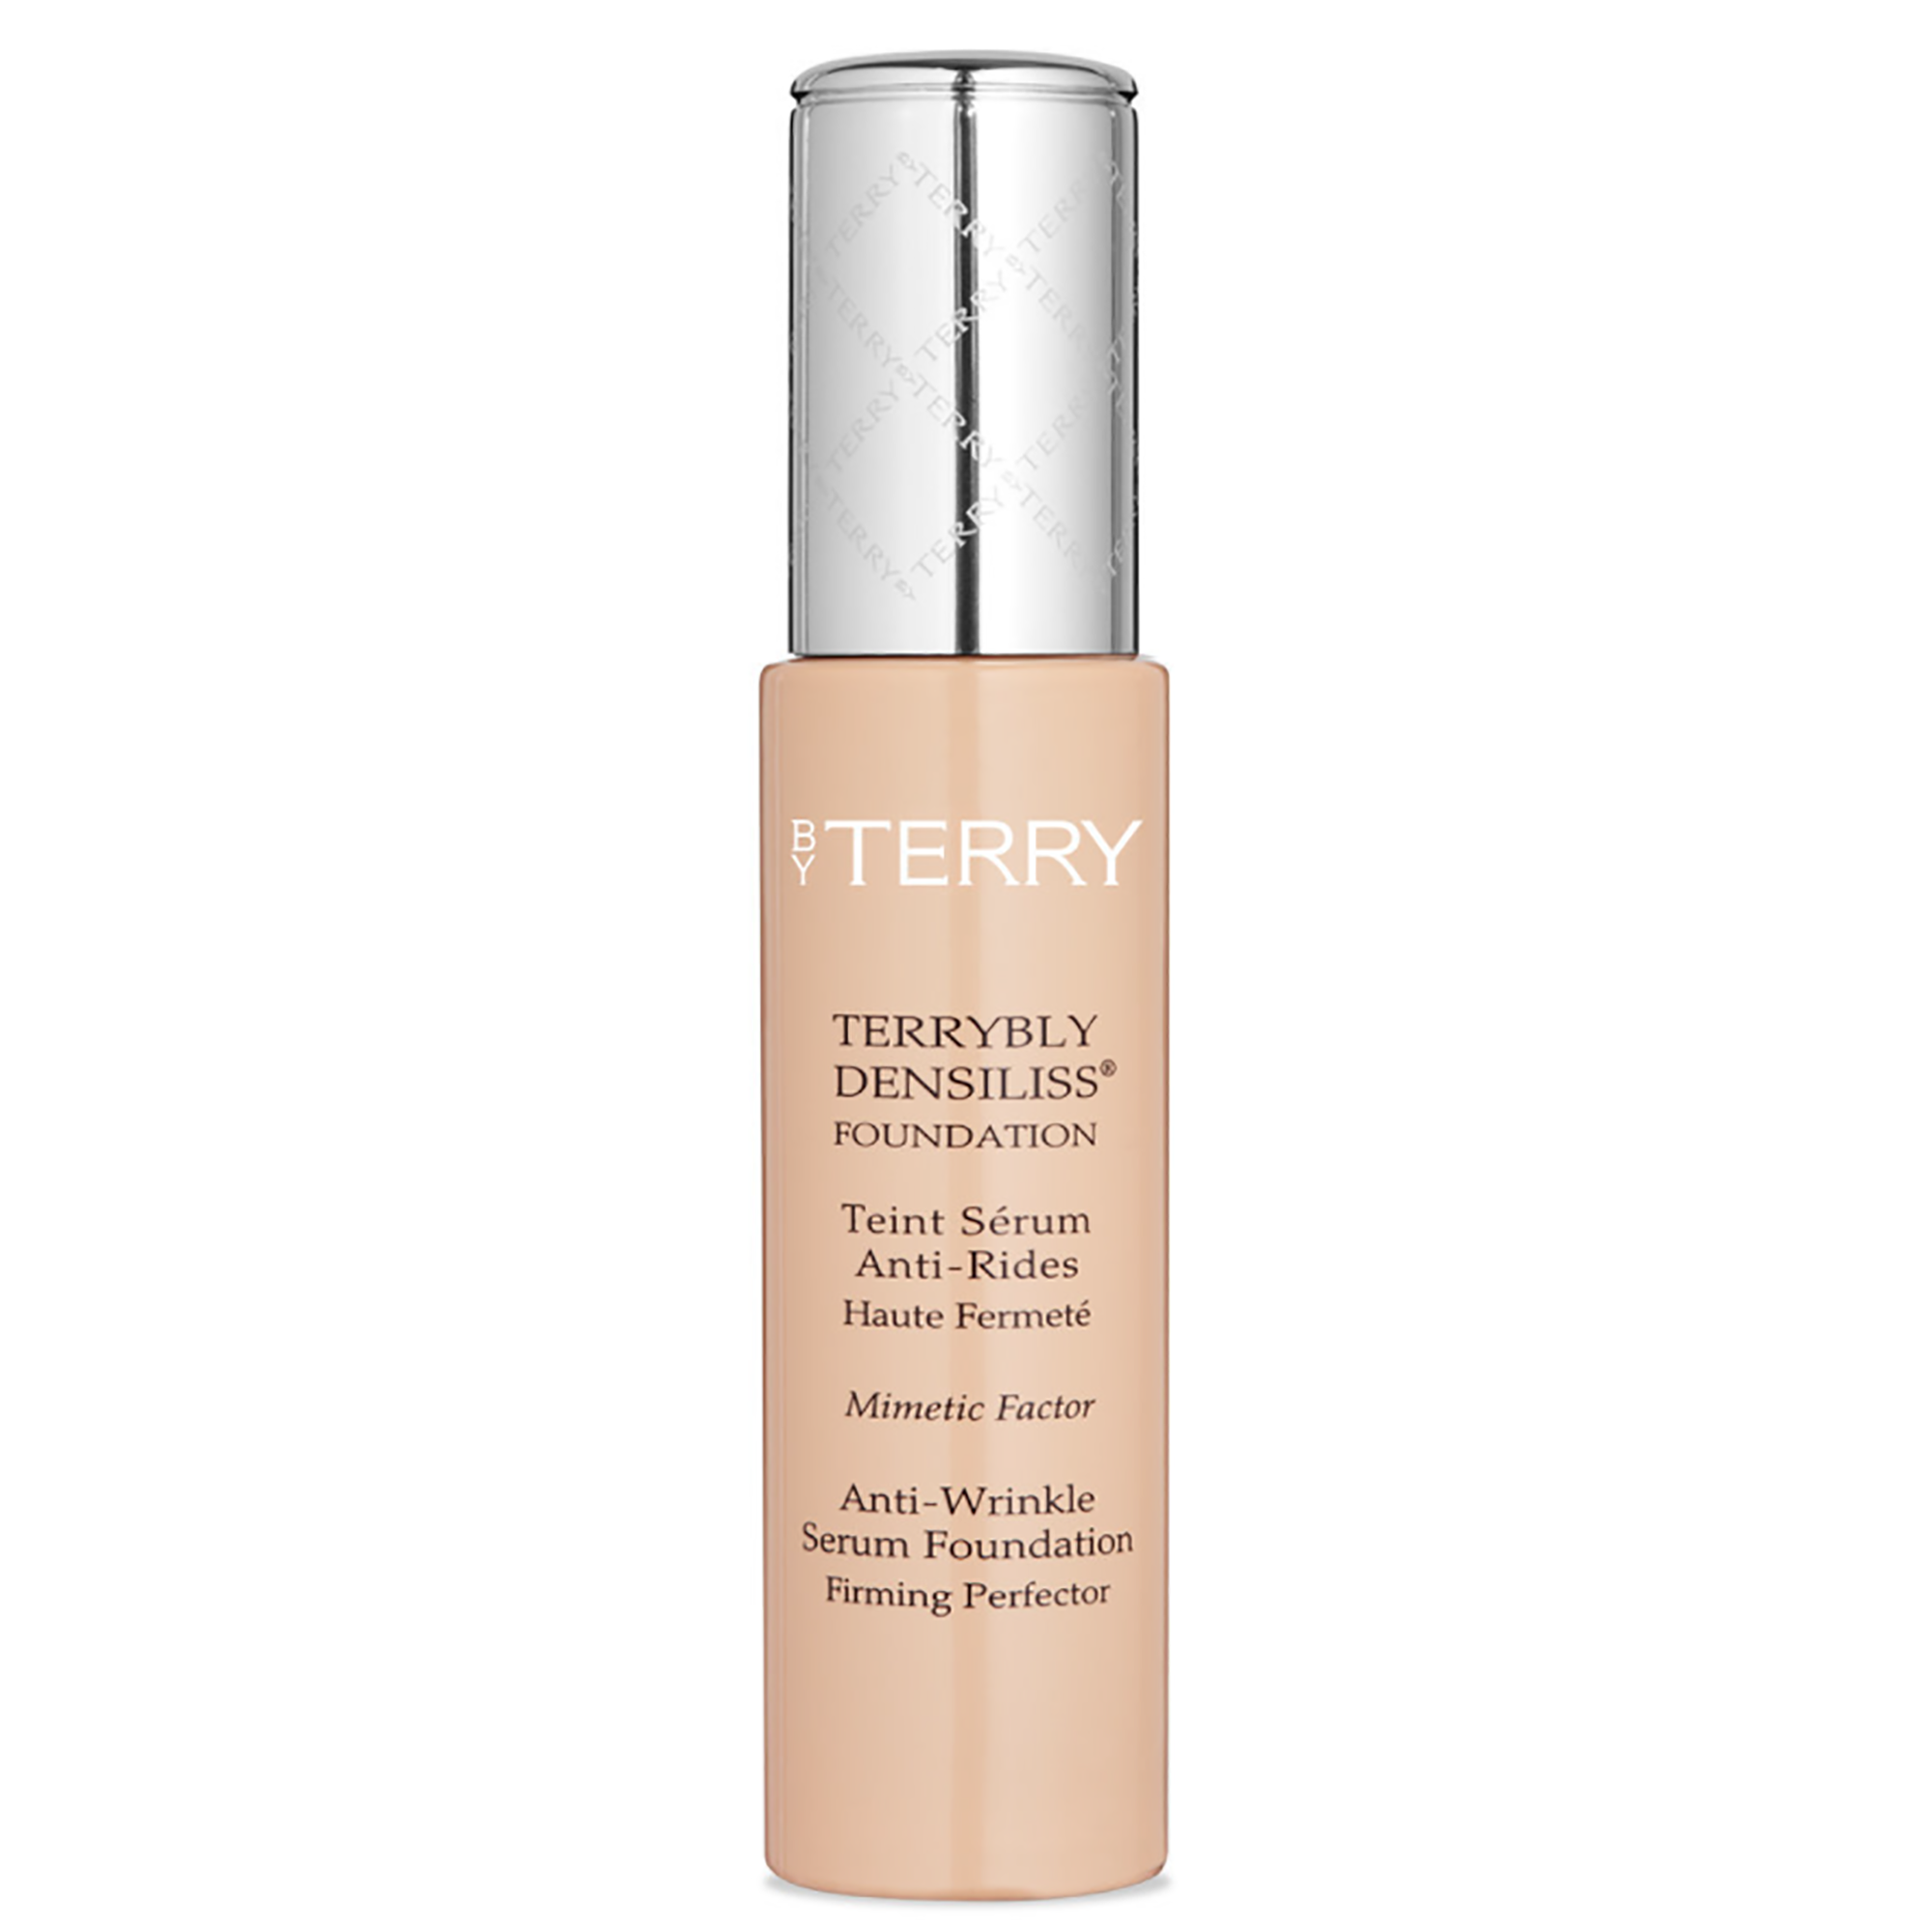 By Terry Terrybly Densiliss Anti-wrinkle Serum Foundation #7 Golden Beige